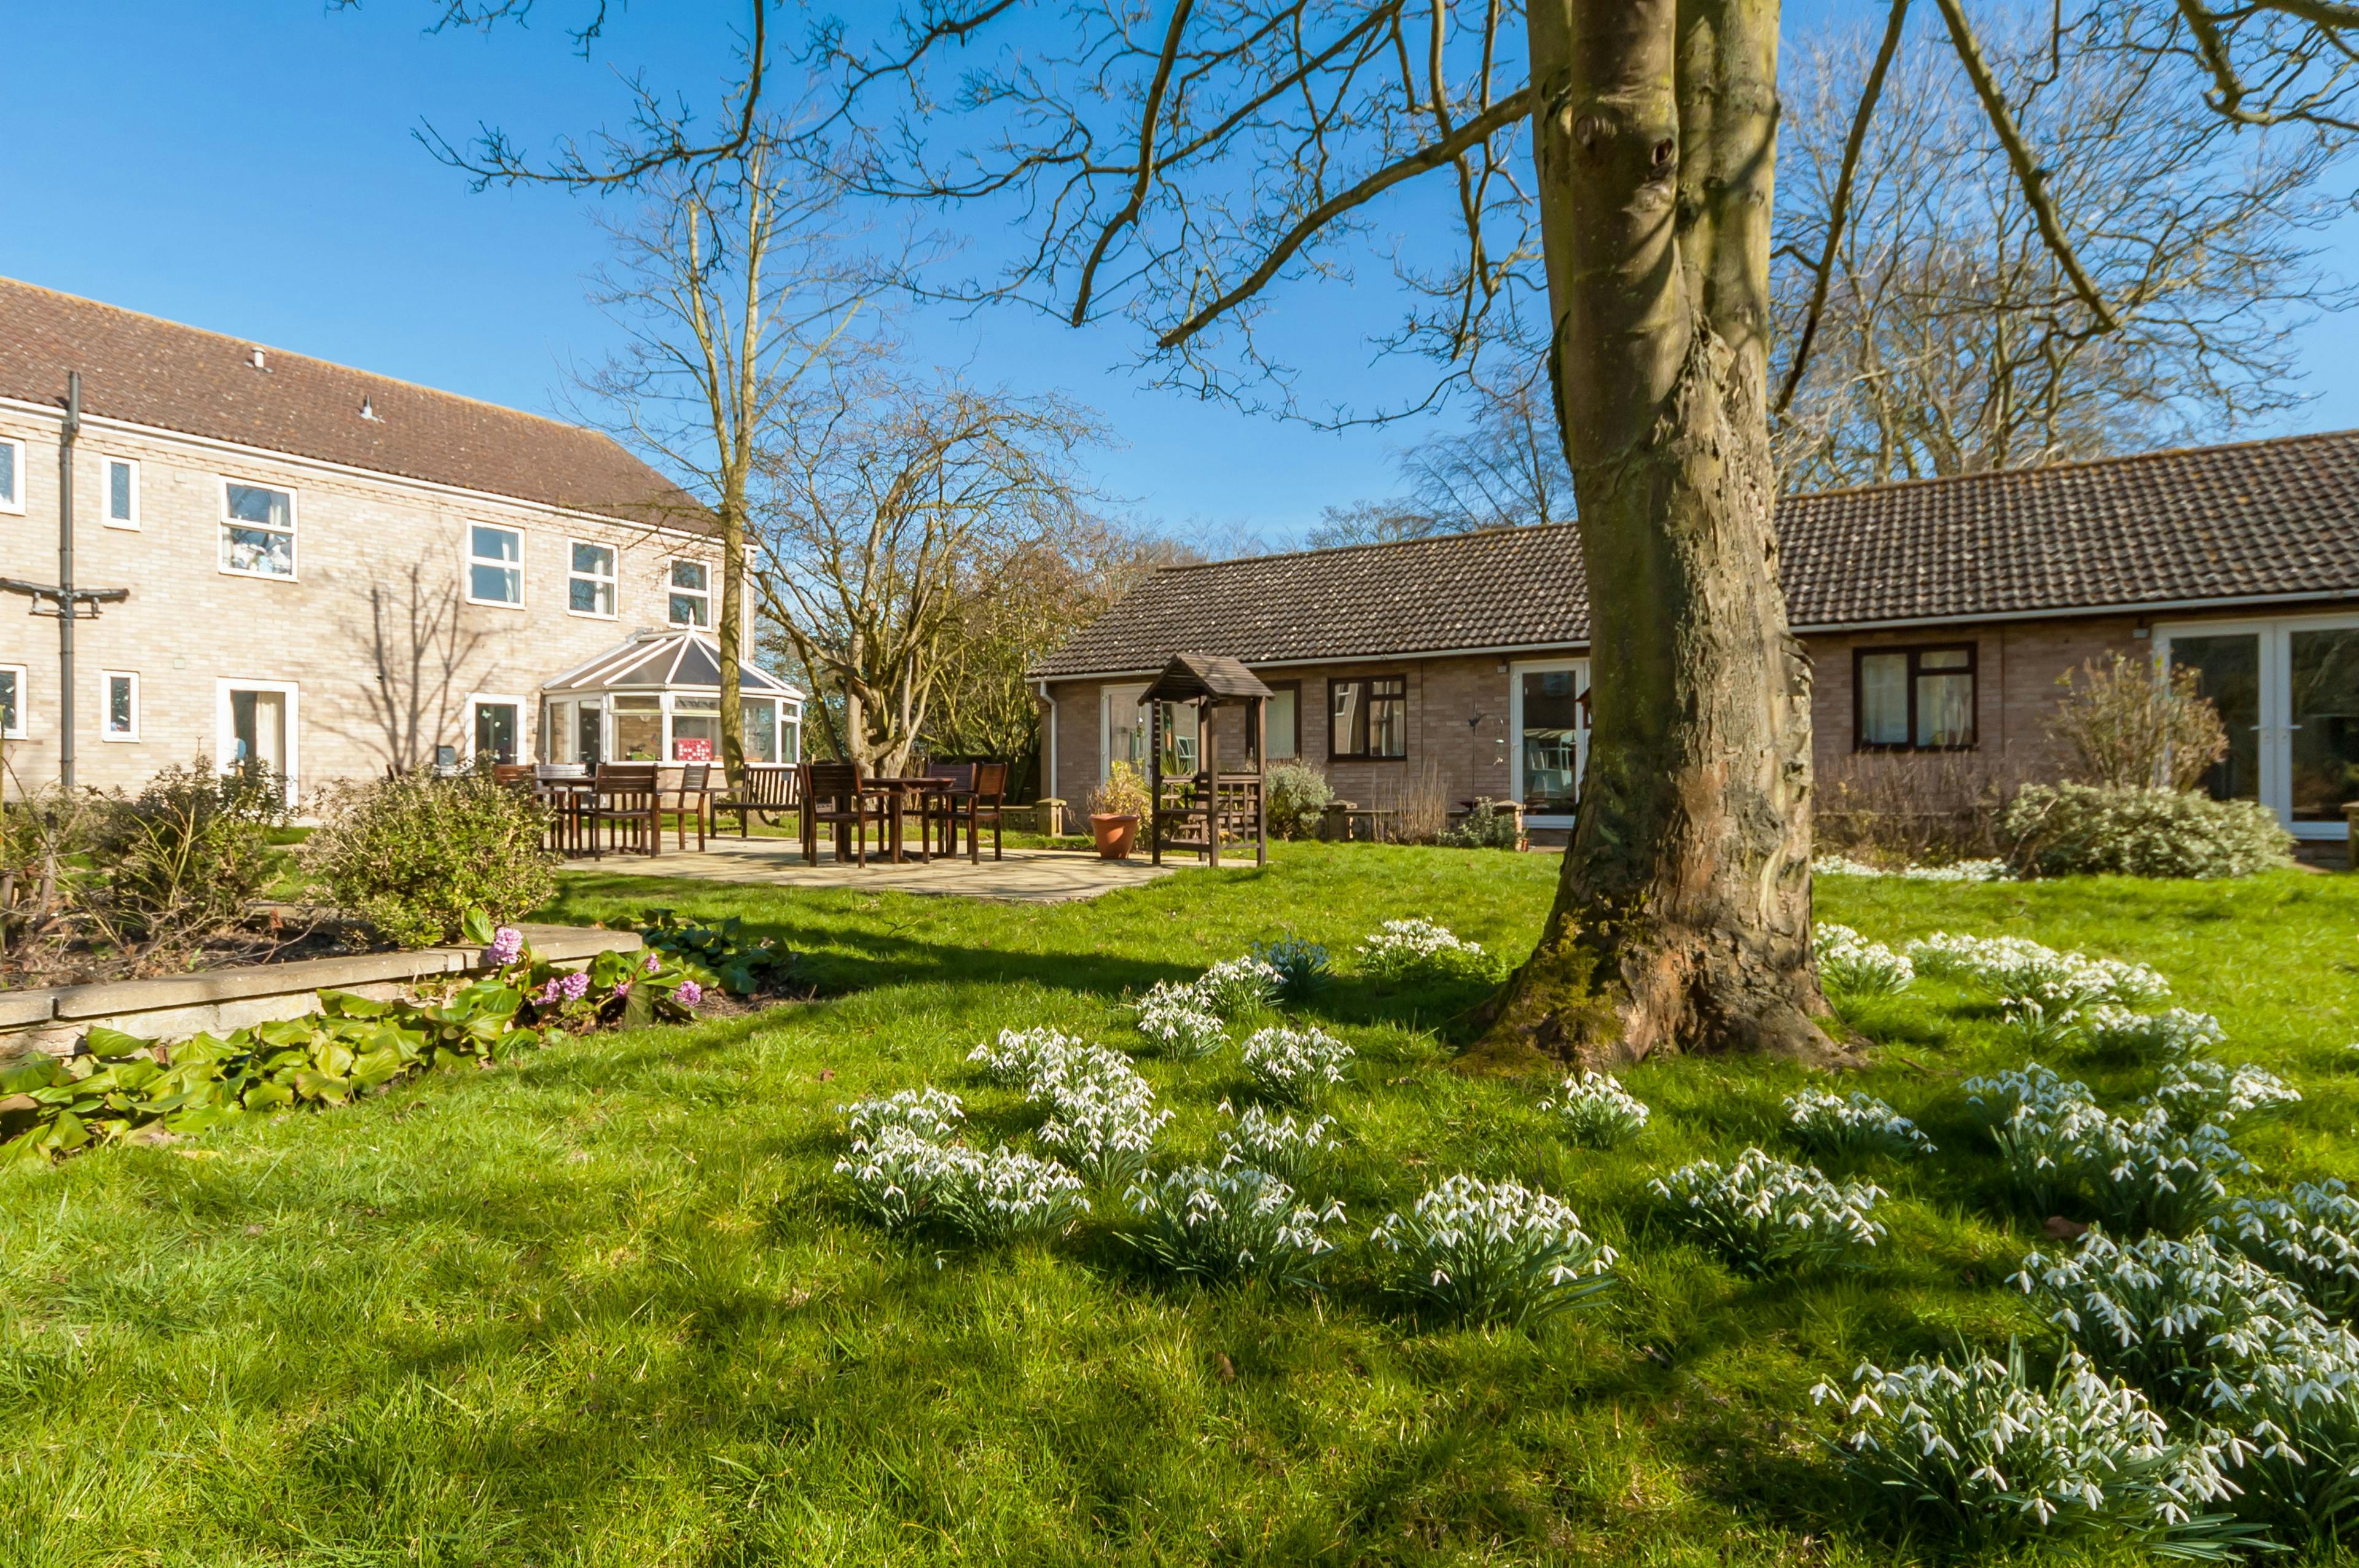 Thorp House care home